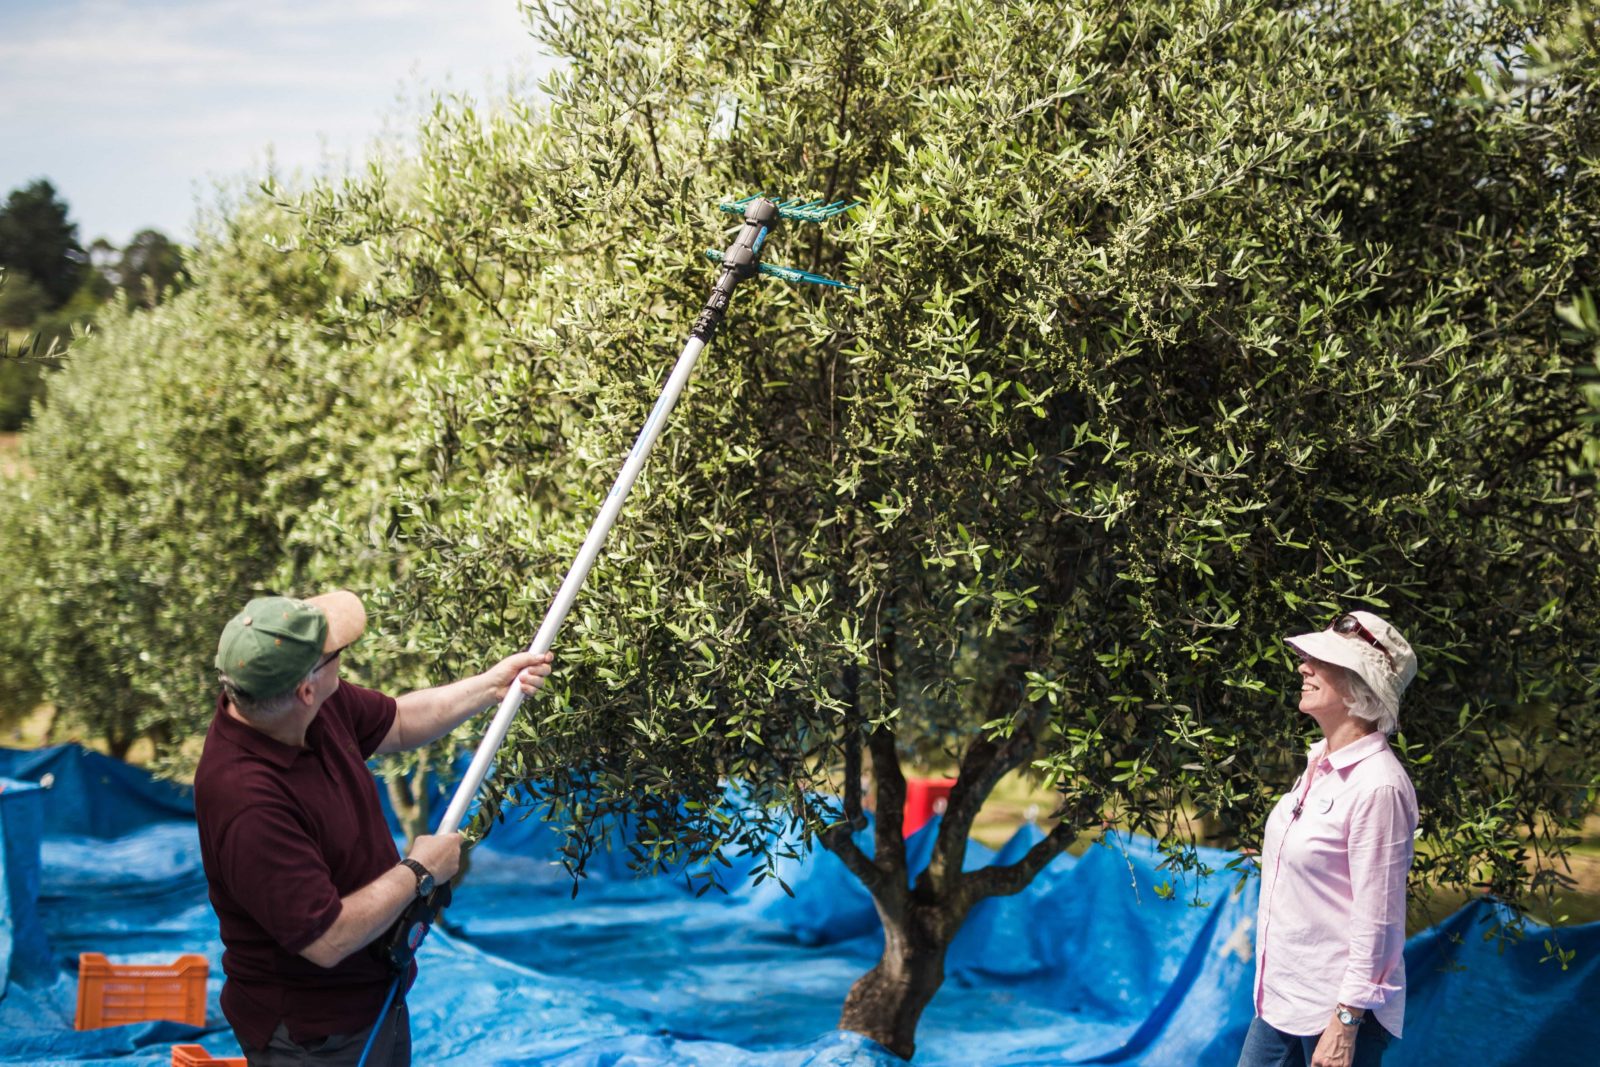 Try your hand at harvesting olives - at Village Olive Grove during Farmgate Festival